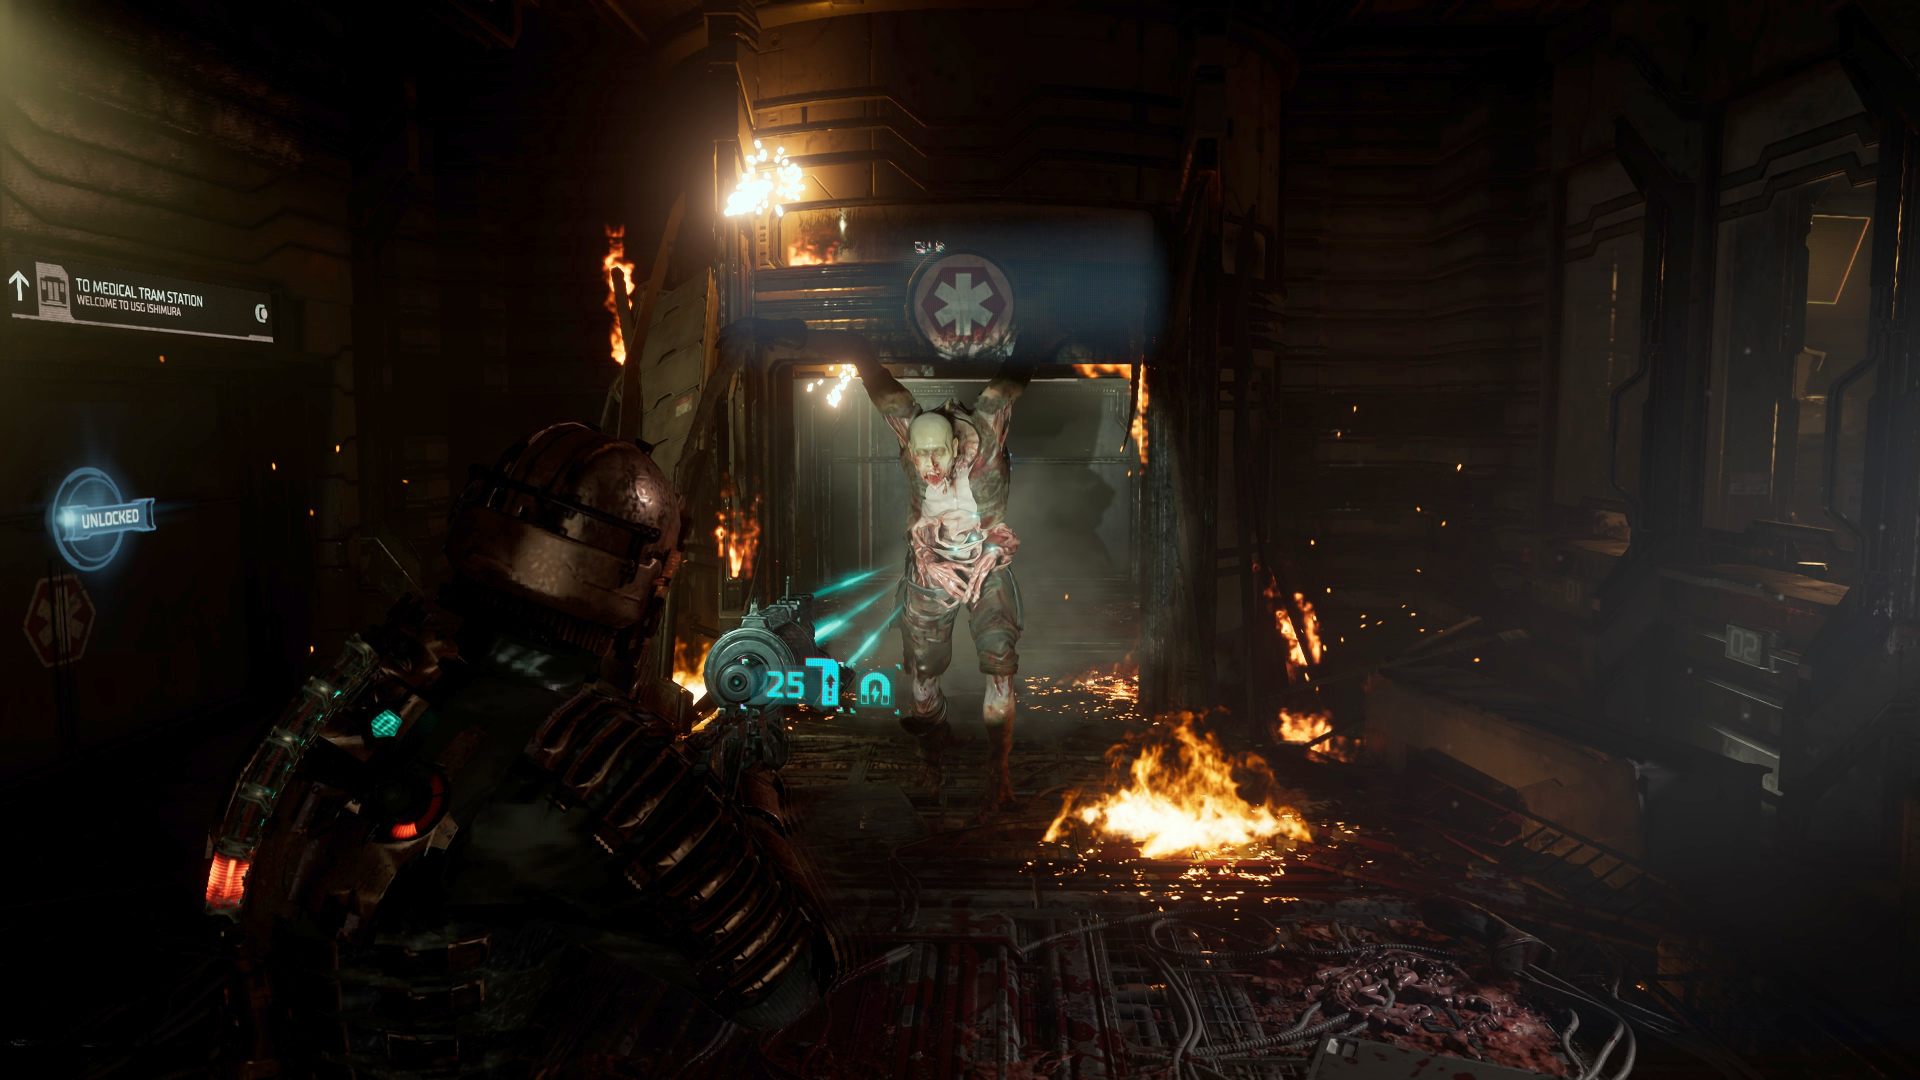 Dead Space Remake review: Isaac Clarke takes aim at an approaching Necromorph with a rifle